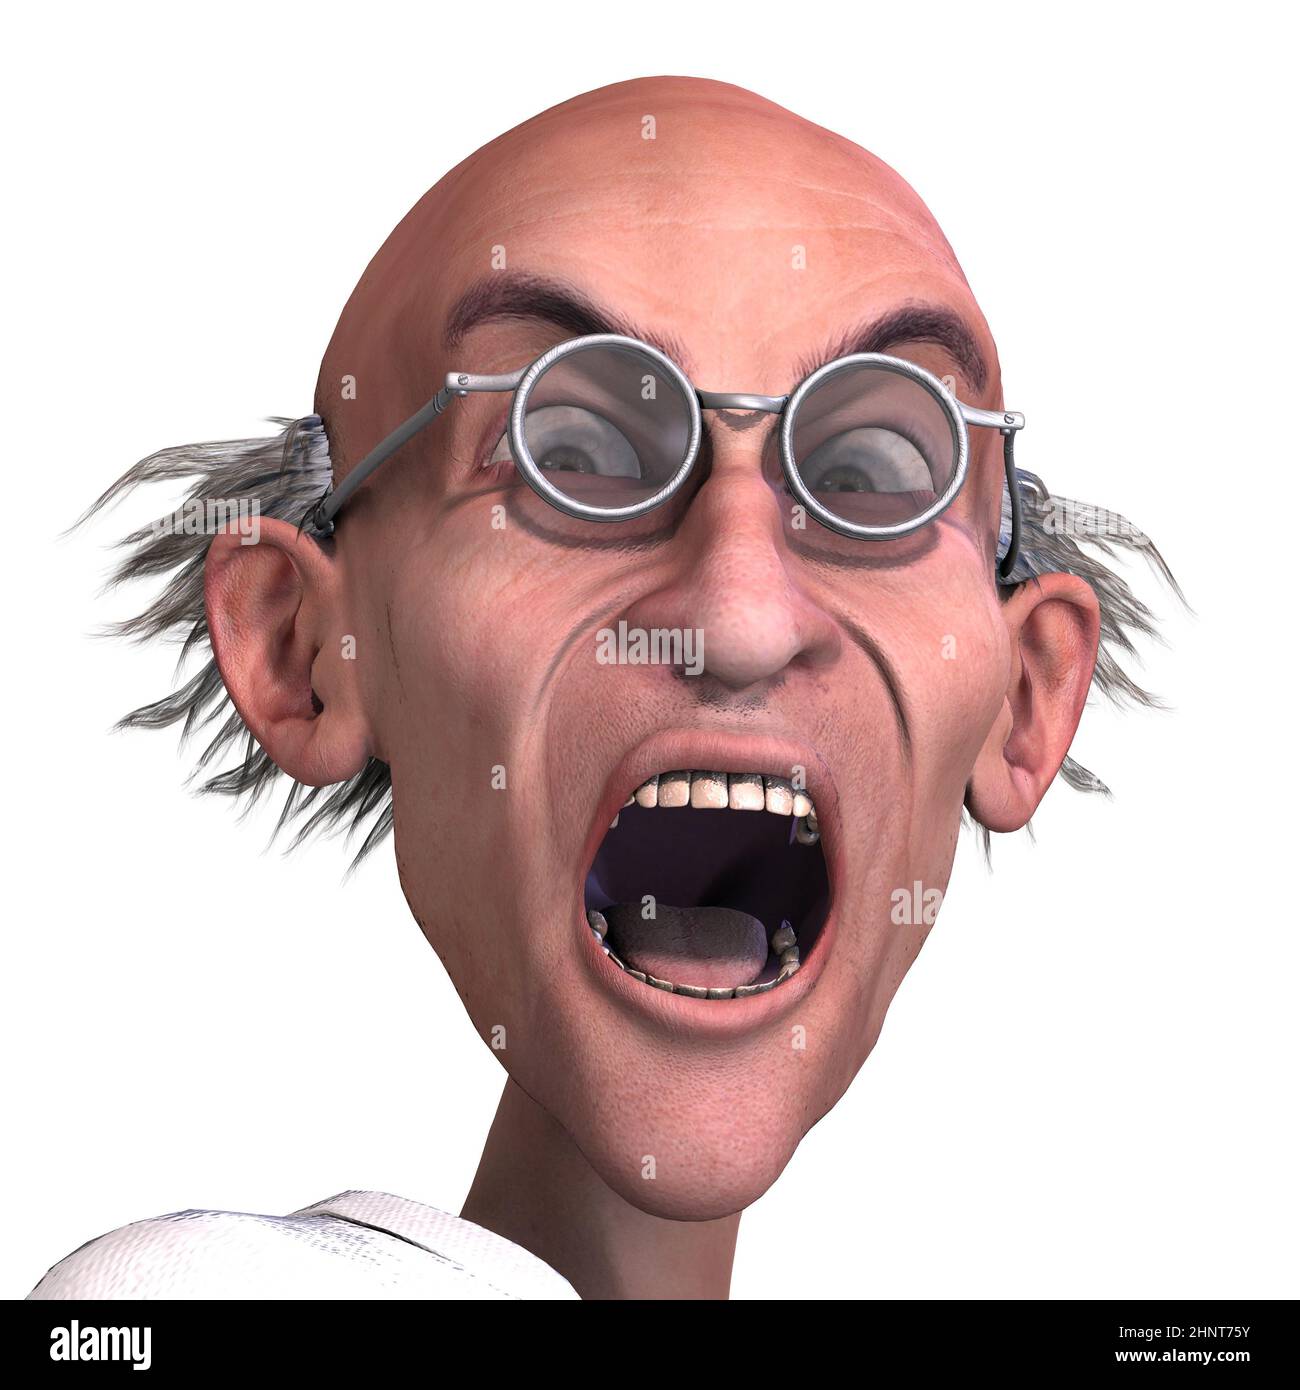 3D-illustration of a cute and funny mad scientist yelling portrait Stock Photo